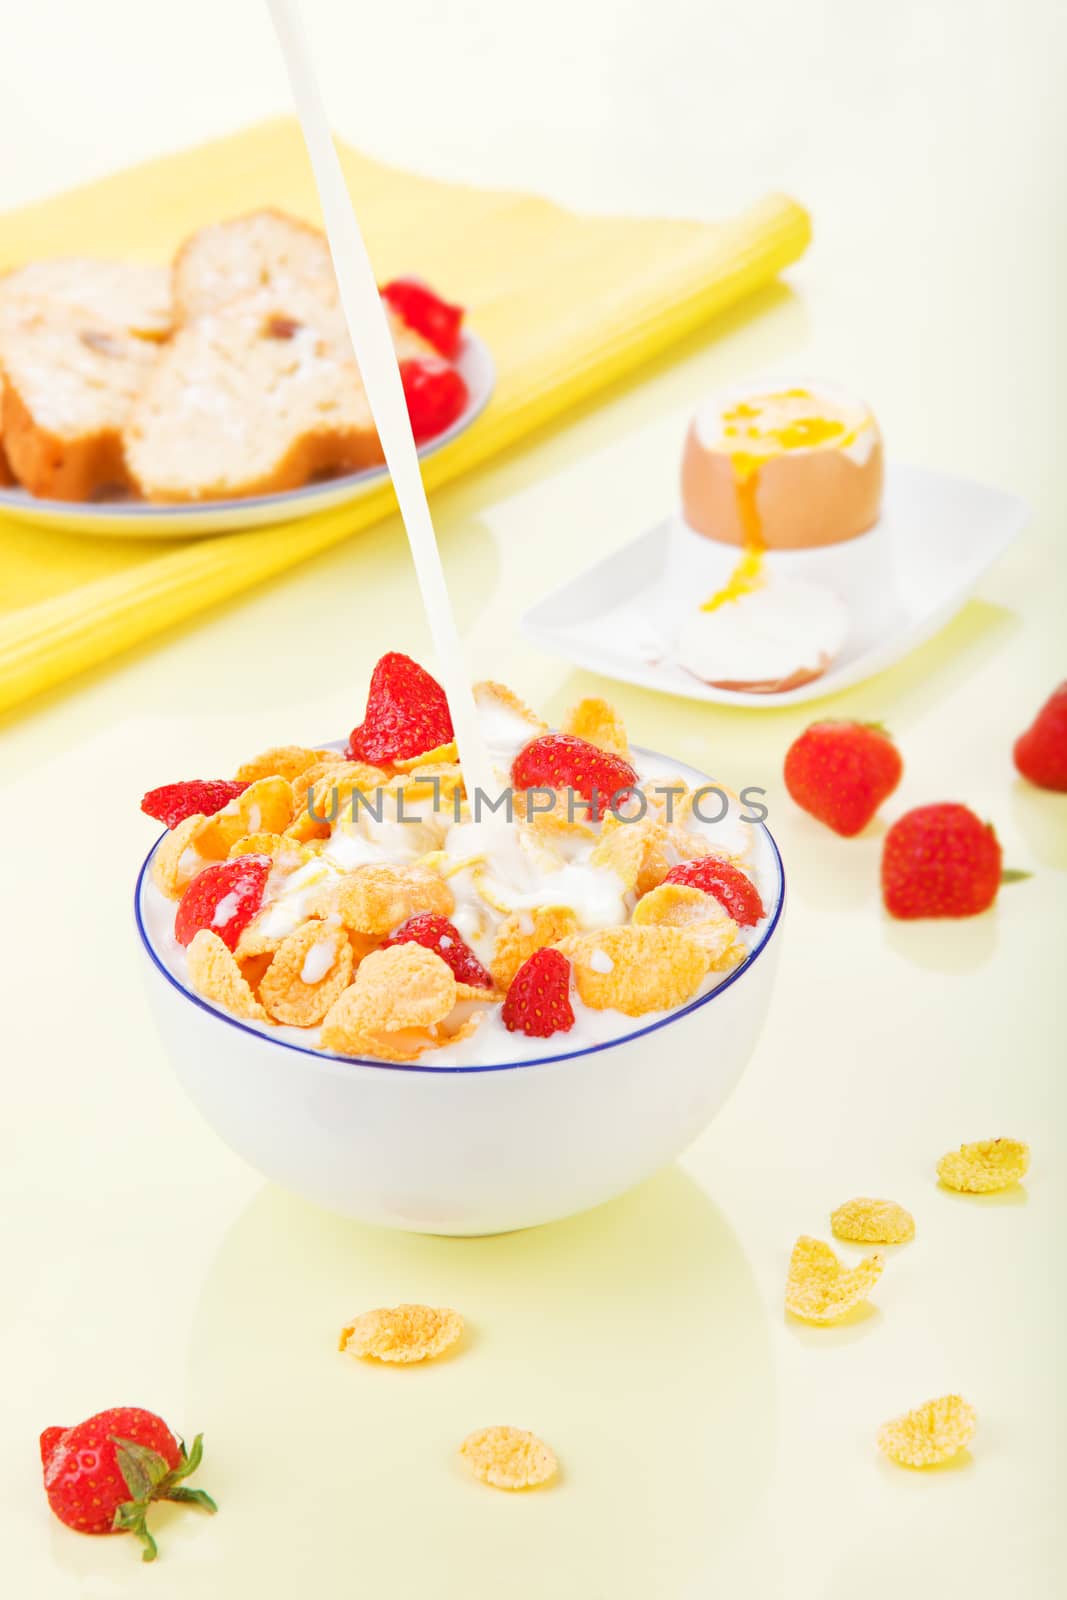 Pouring milk into bowl with corn flakes with strawberries. Delicious breakfast. Corn flakes with strawberries in bowl, bread and egg in background.